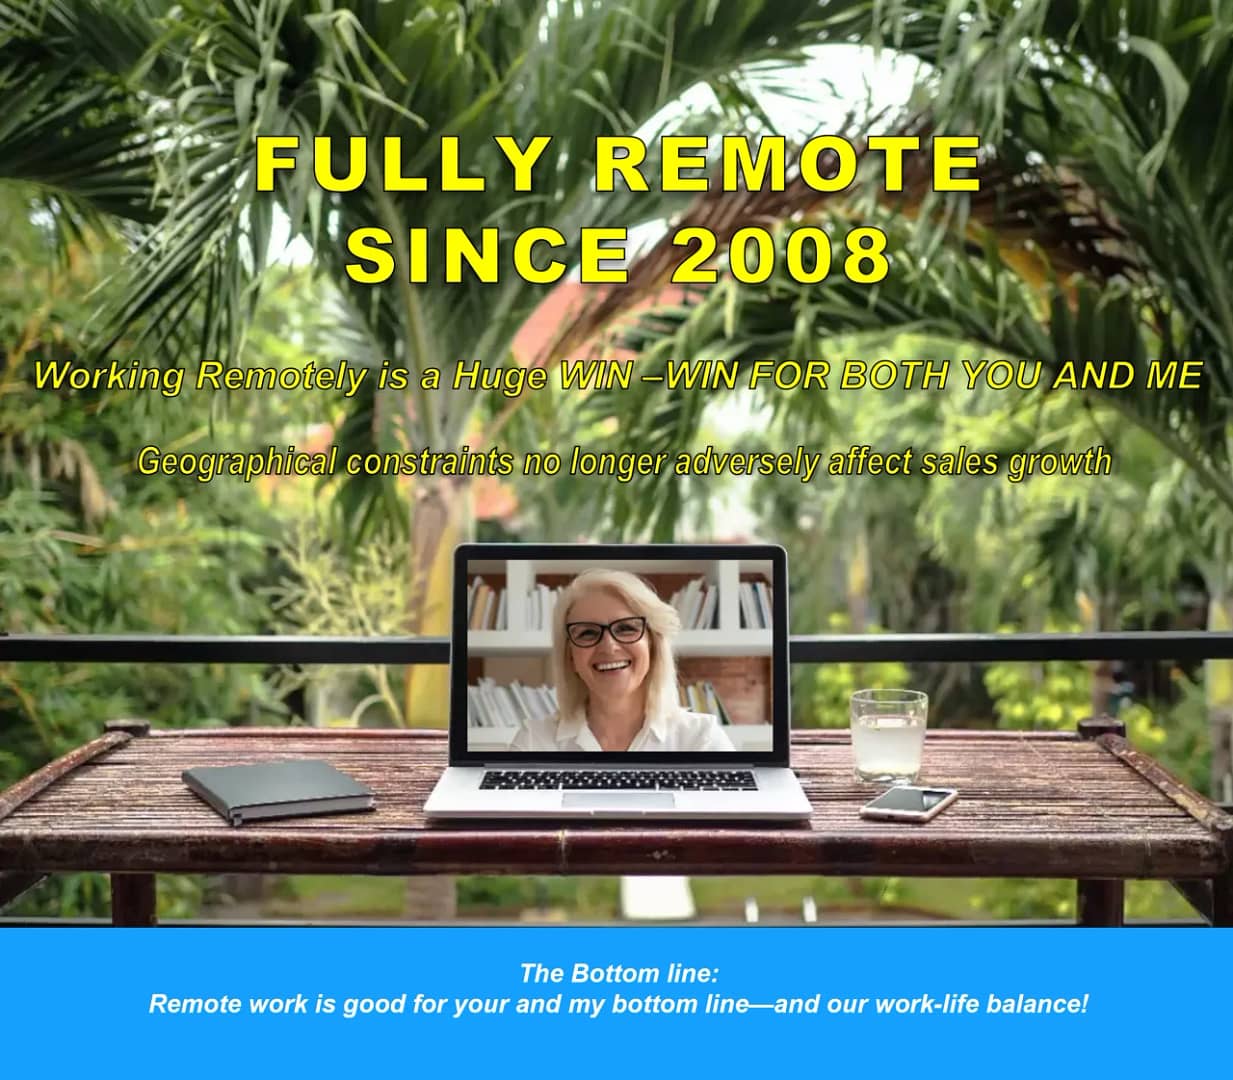 Image-How I Work-Fully Remote Win-Win-Bottom Line